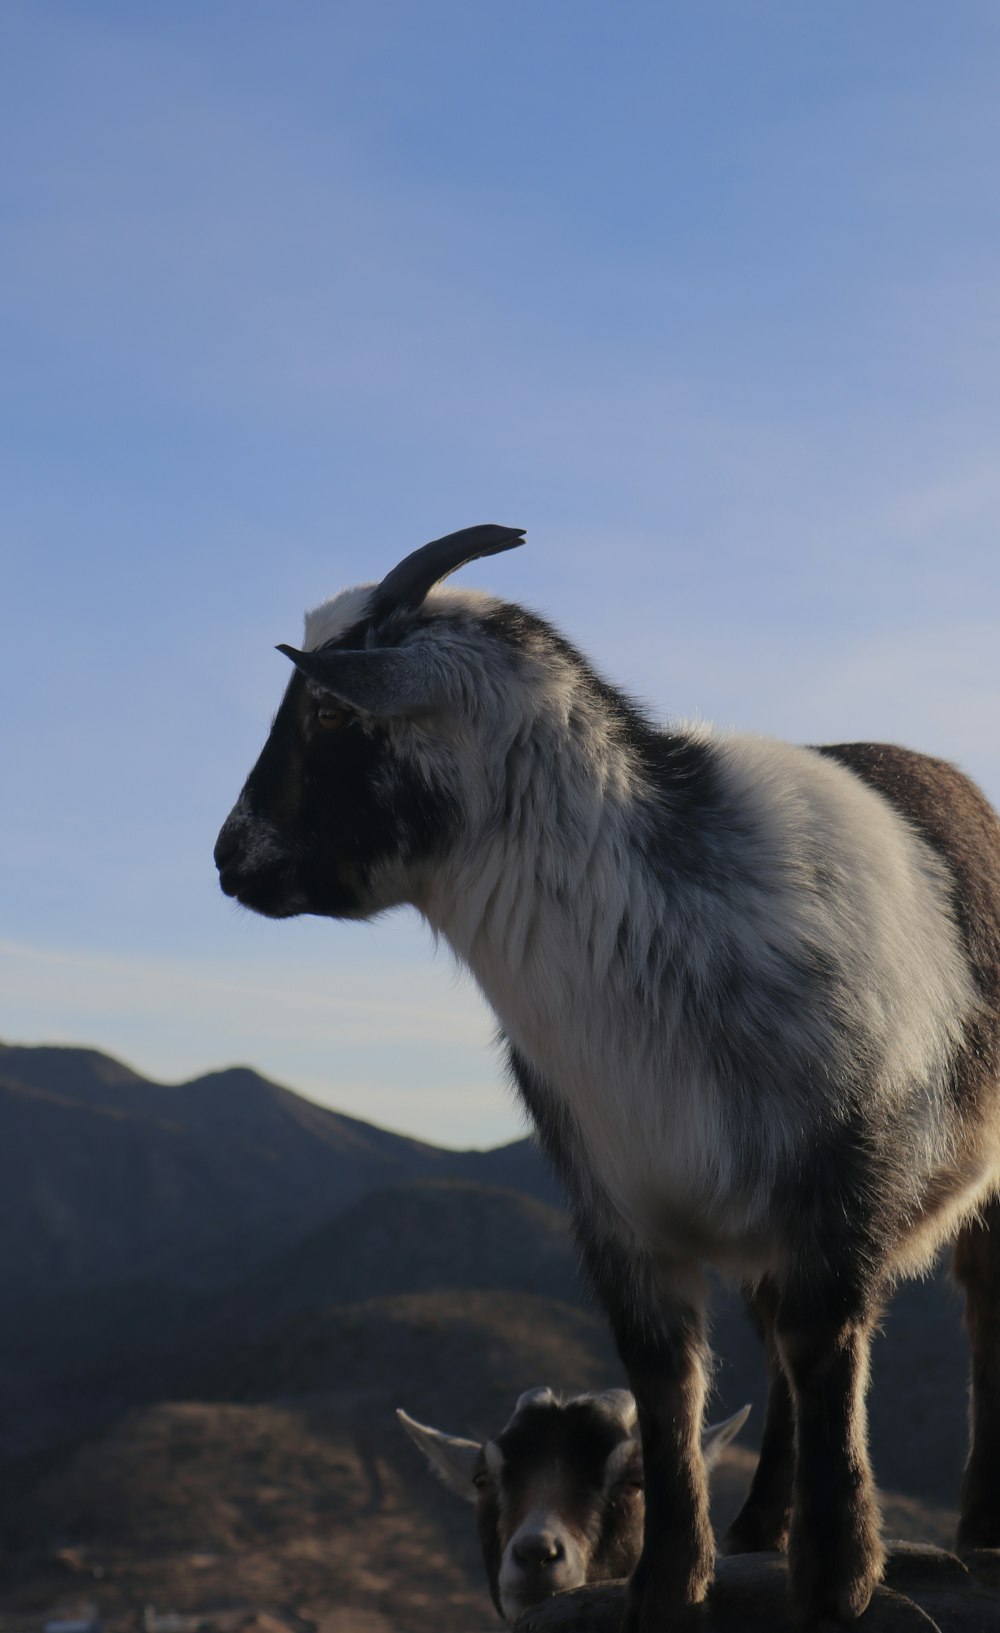 a mountain goat with long horns standing on a rock